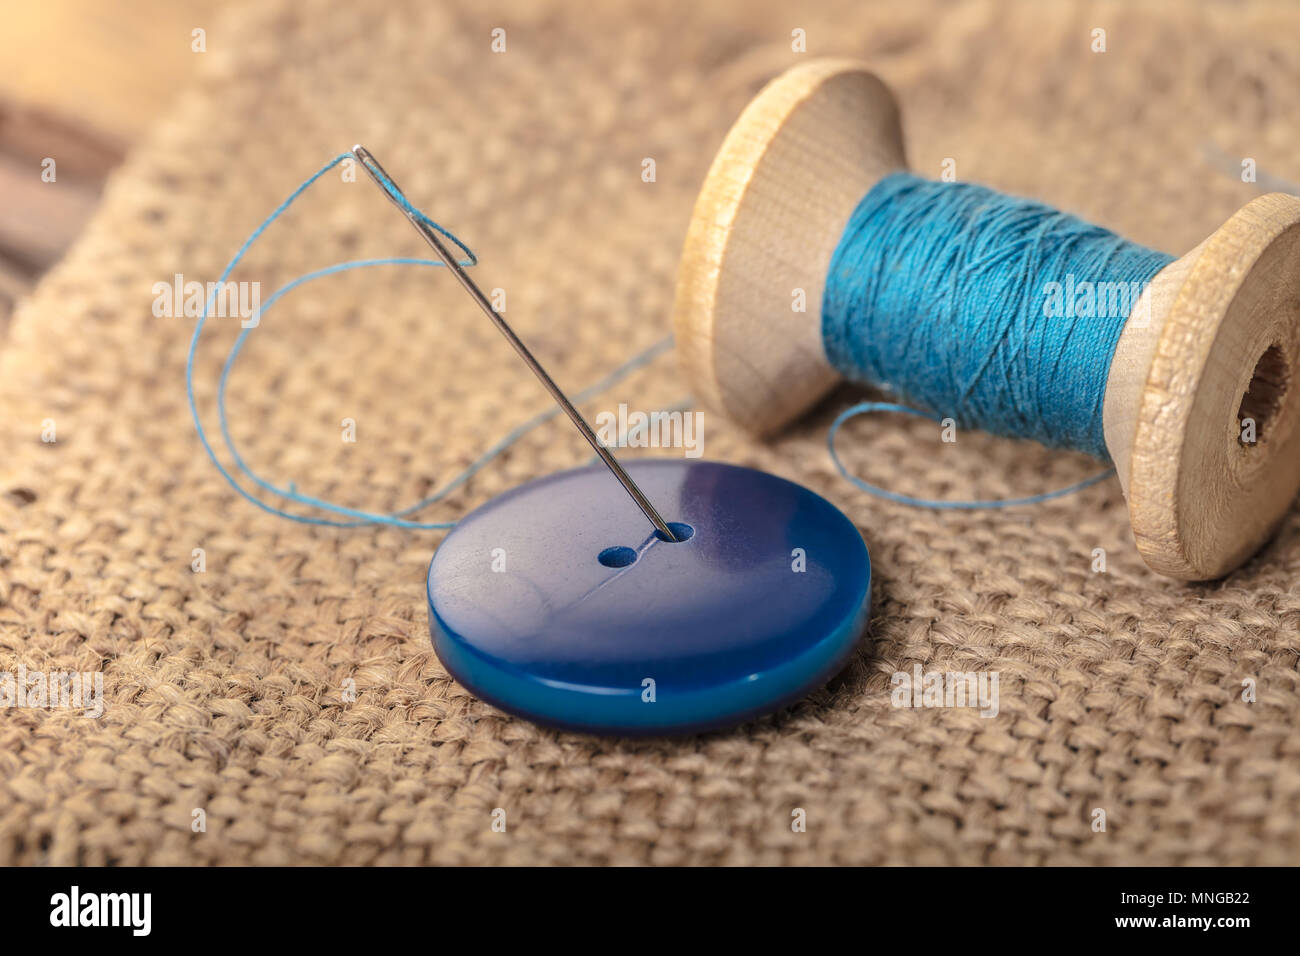 Spools of thread and buttons with needle Stock Photo - Alamy